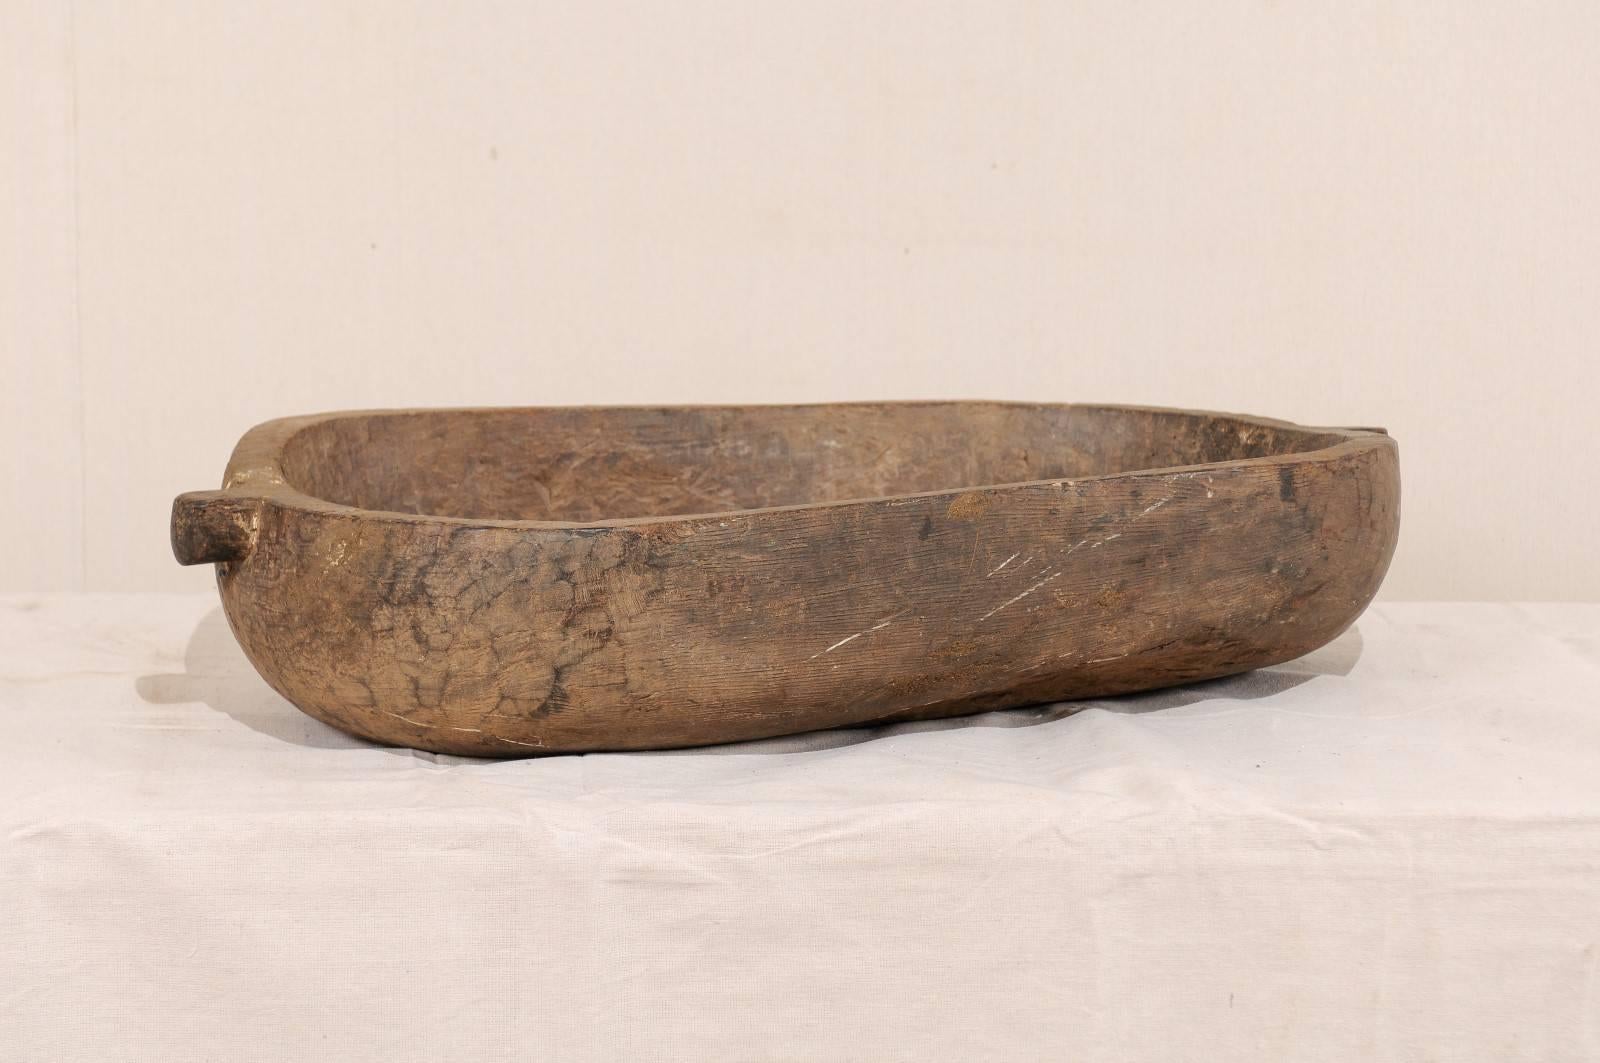 A vintage Naga carved wood bowl. This beautifully Primitive bowl has been carved from a single piece of wood, features and oblong shape and a single handle at either end. These bowls were originally used in kitchens of the Naga people for various